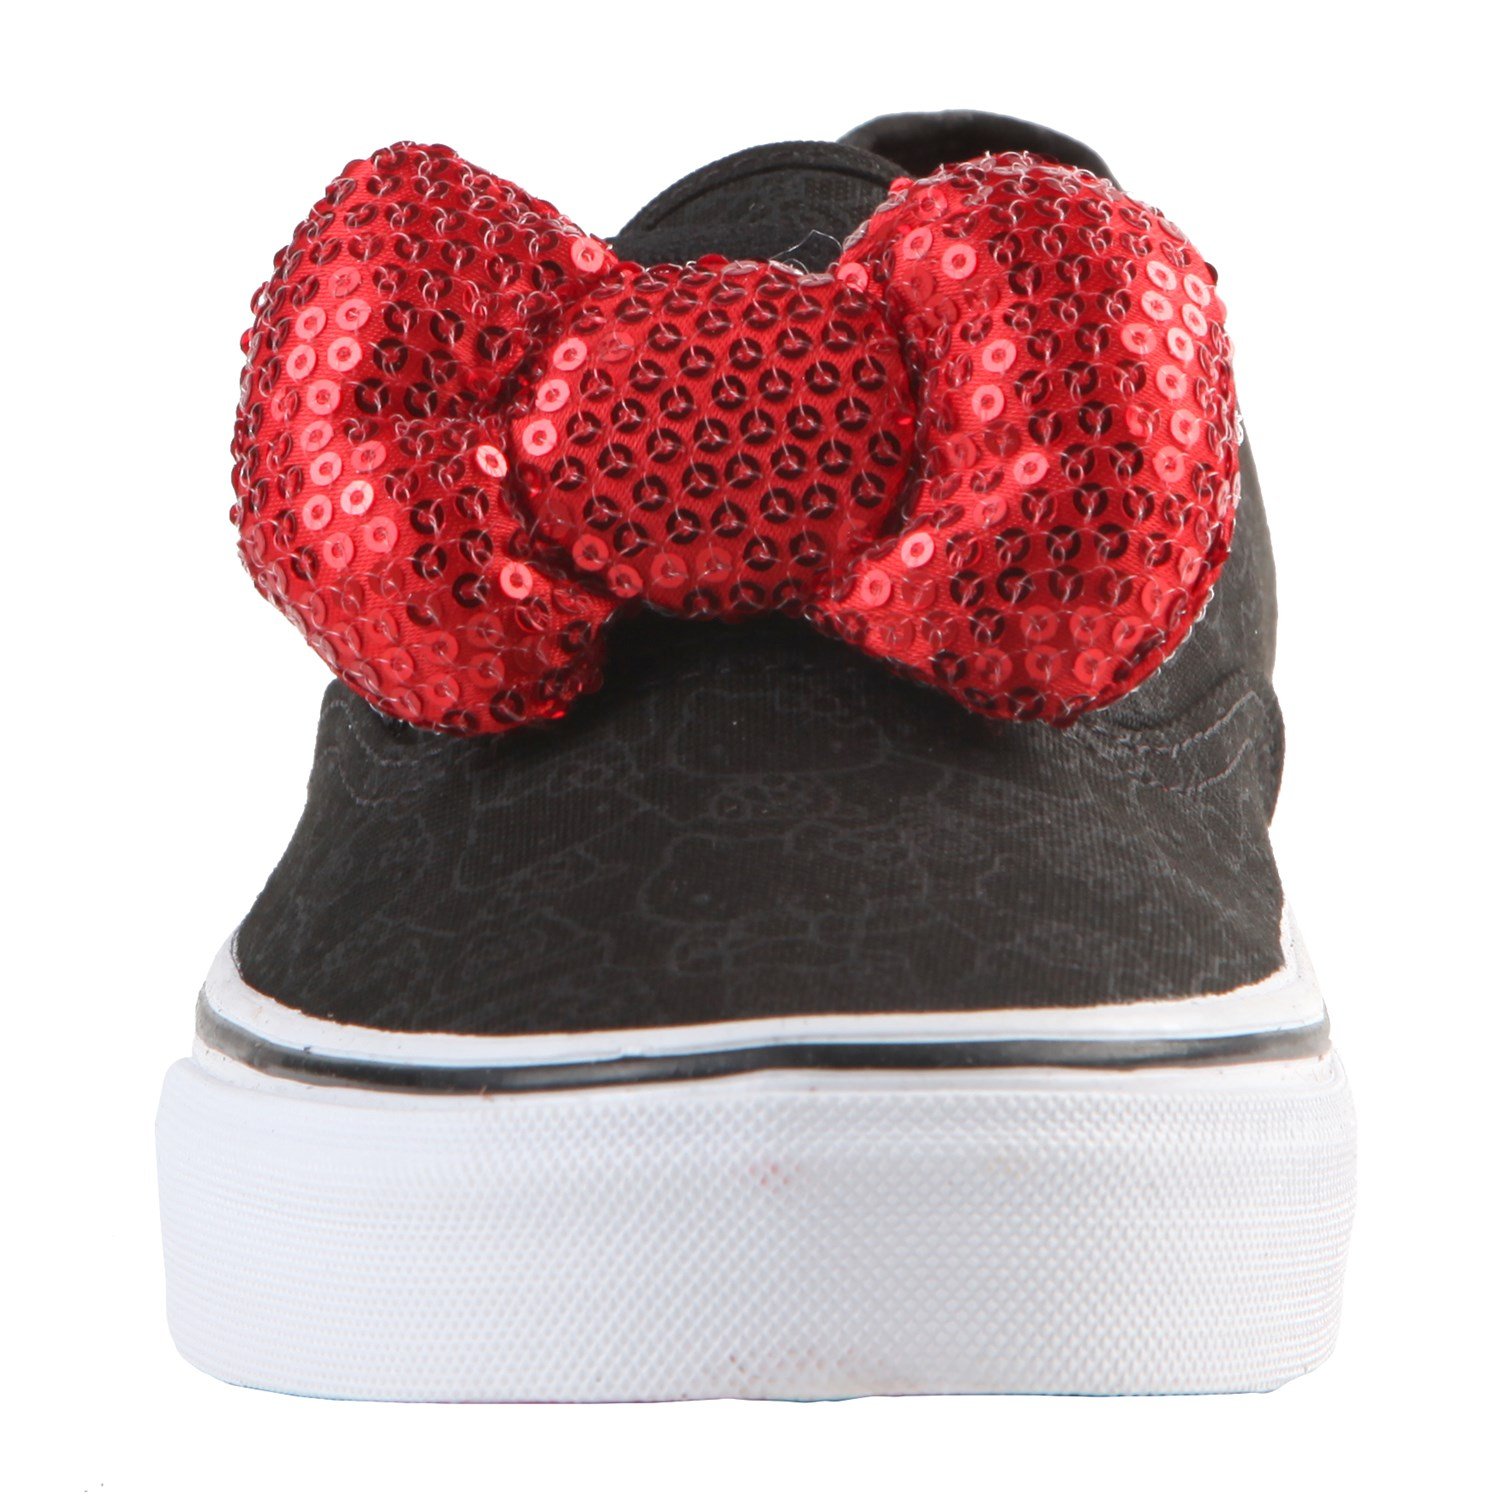 vans with bow